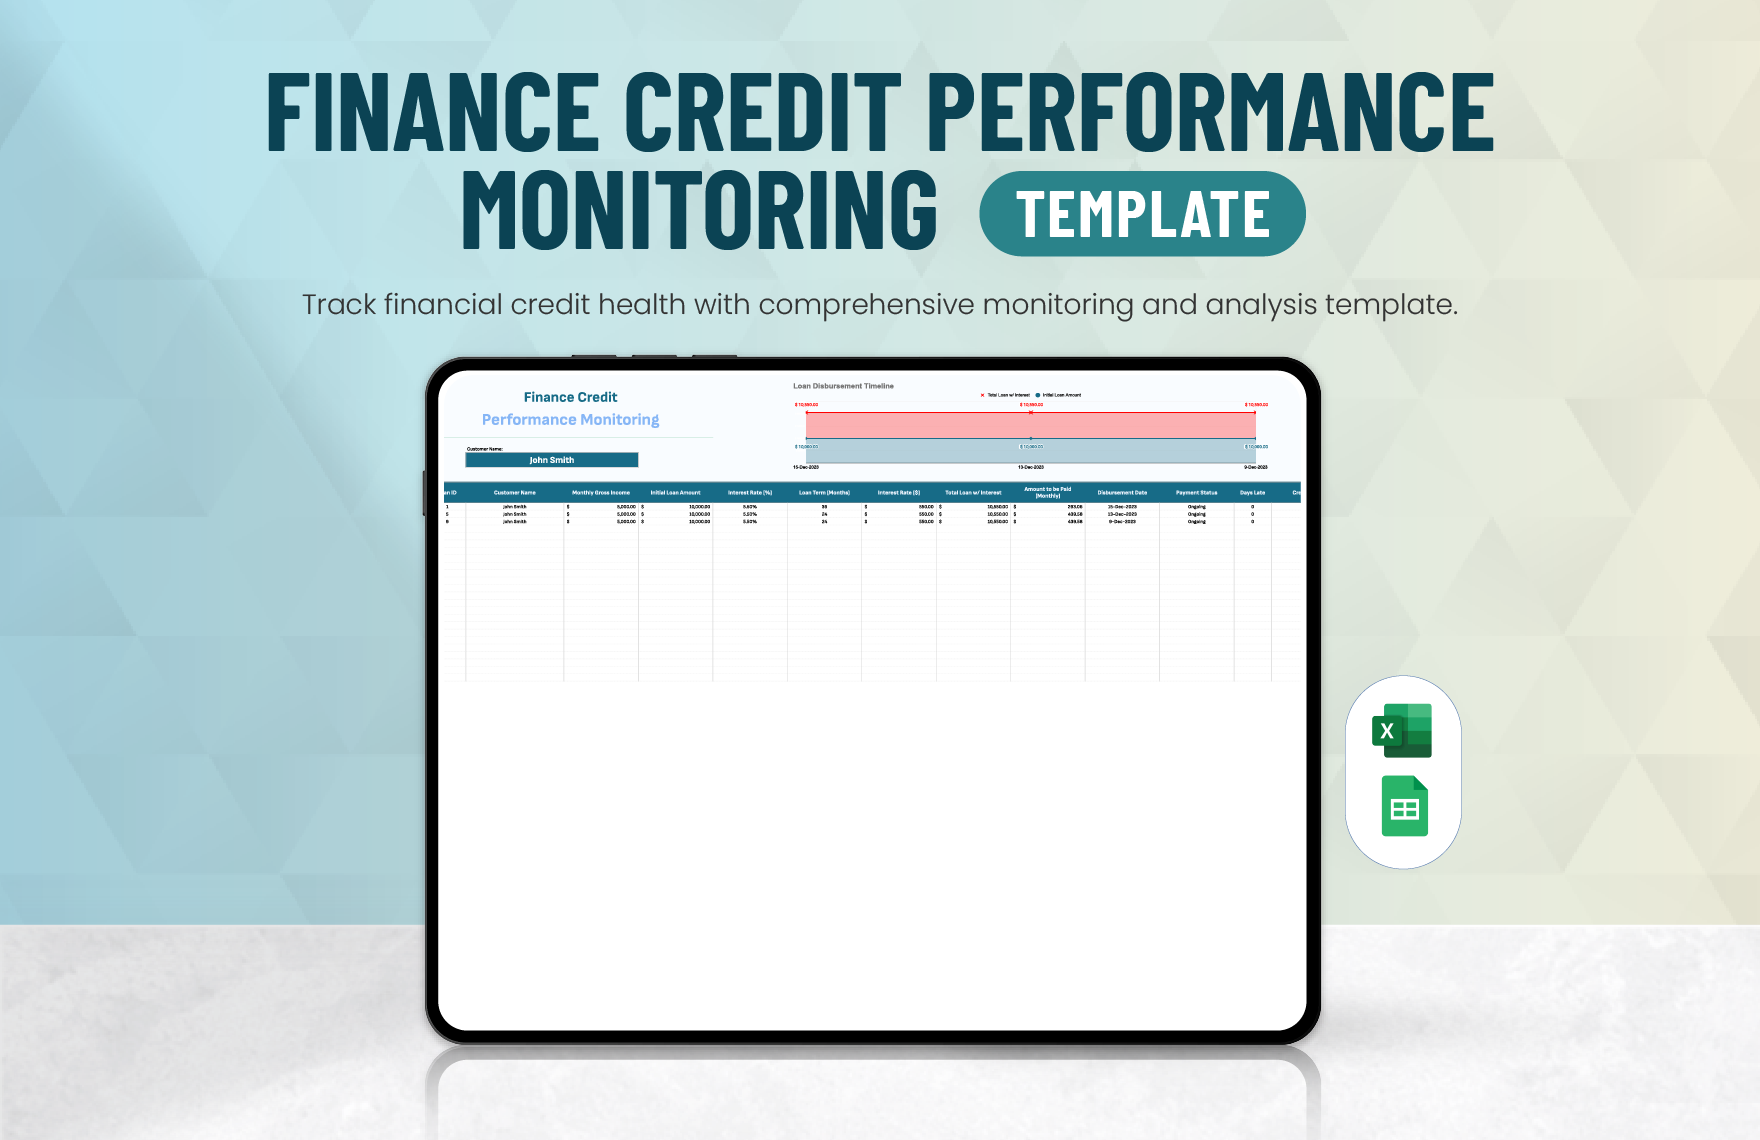 Finance Credit Performance Monitoring Template